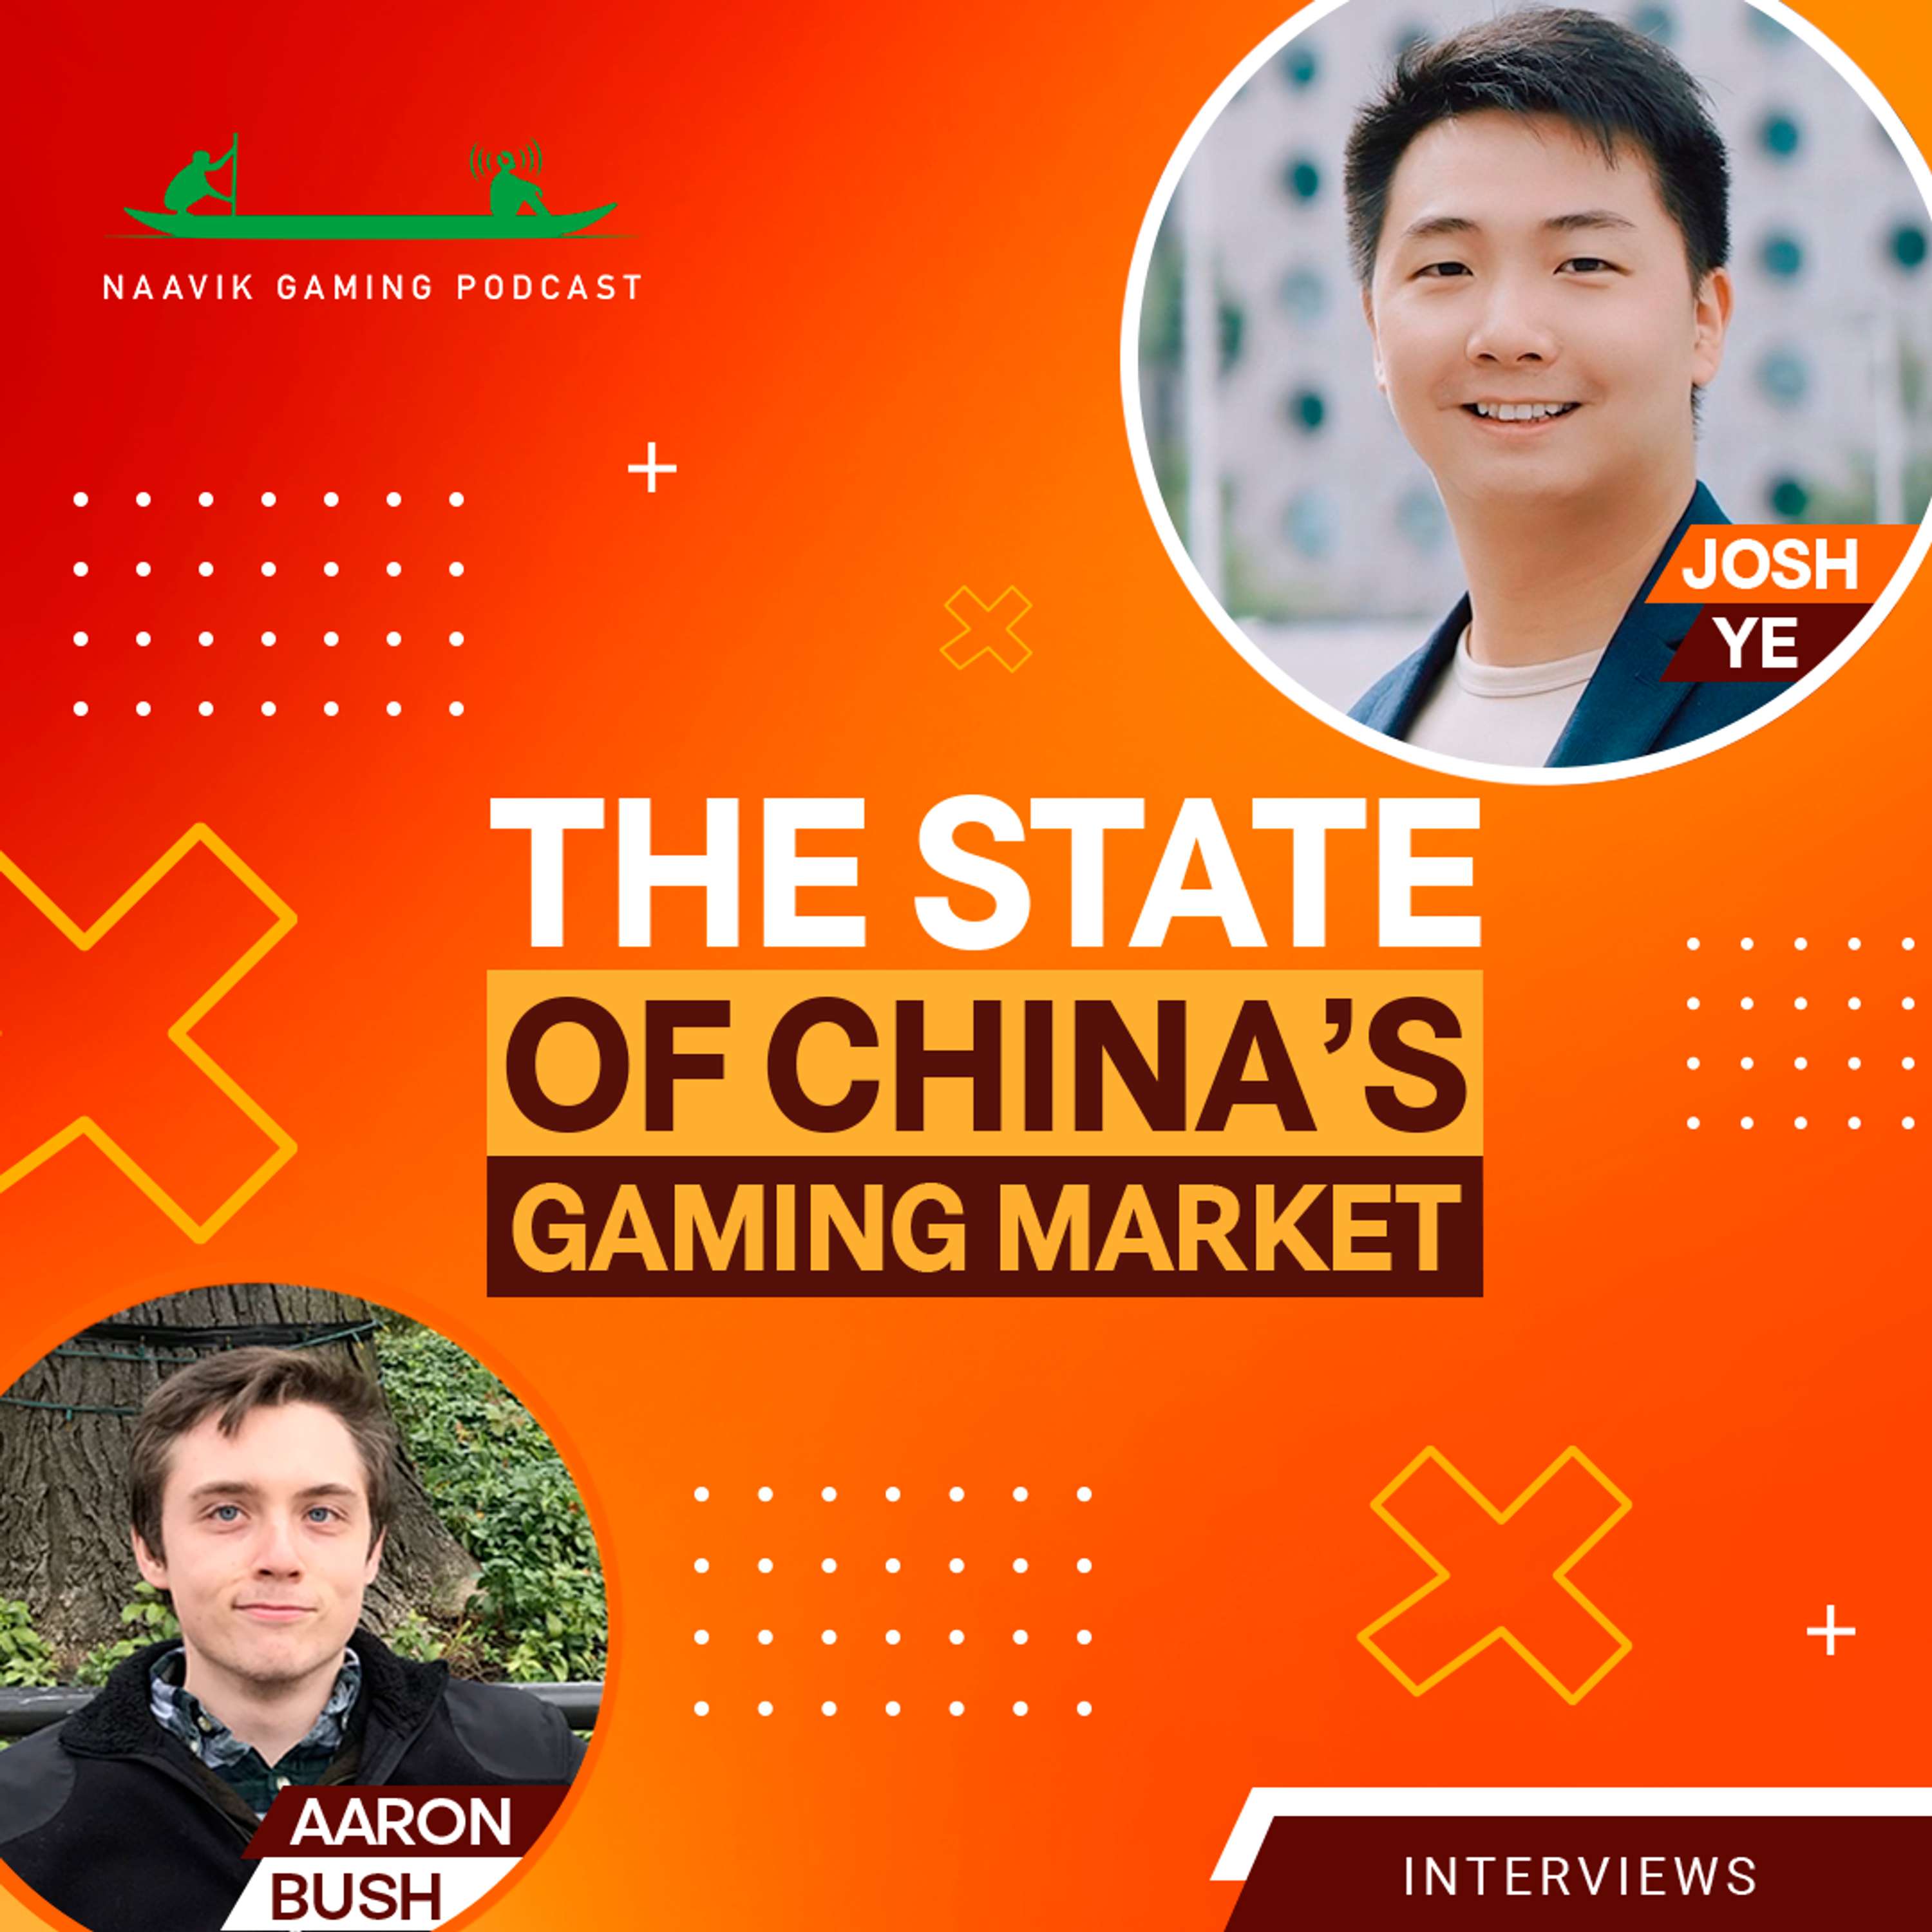 The State of China’s Gaming Market